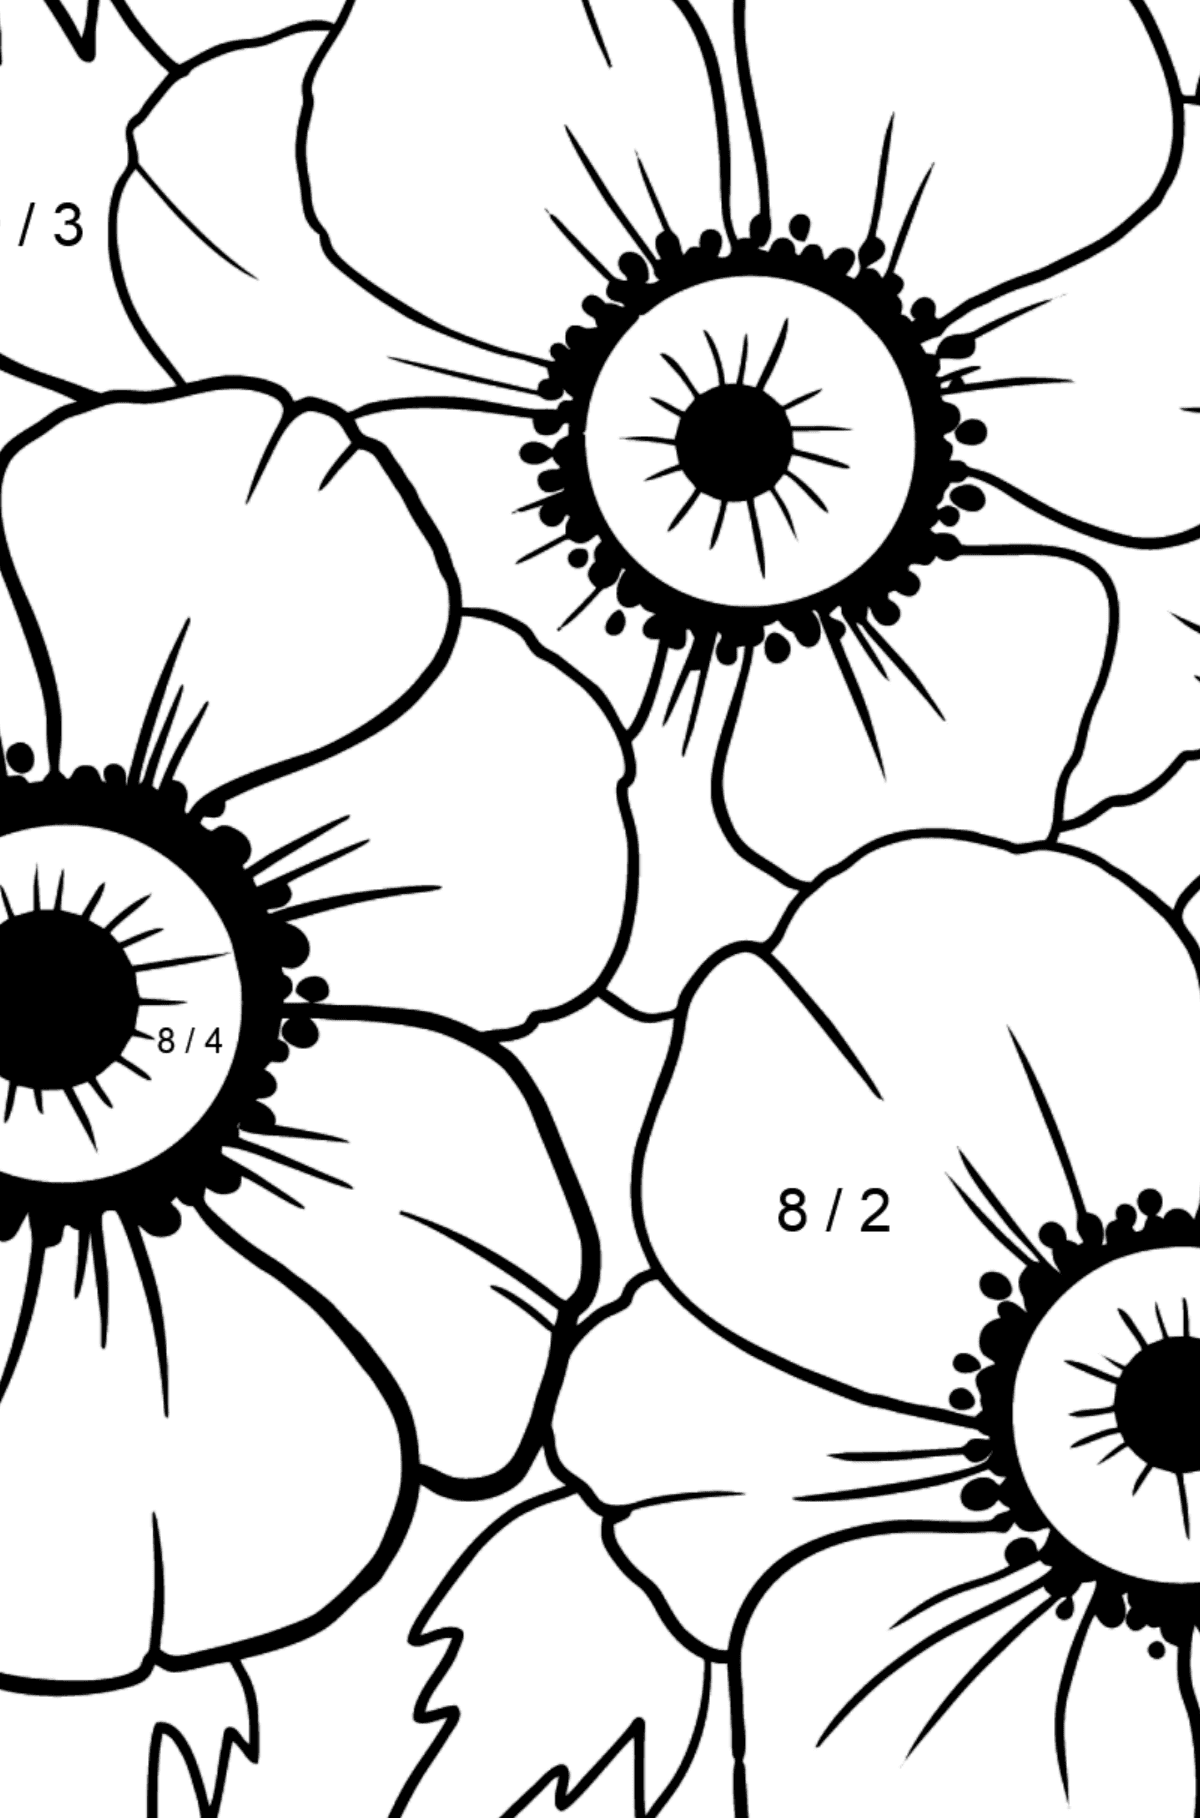 Coloring Page with big flower - A Red and Pink Anemone Coronaria - Math Coloring - Division for Kids